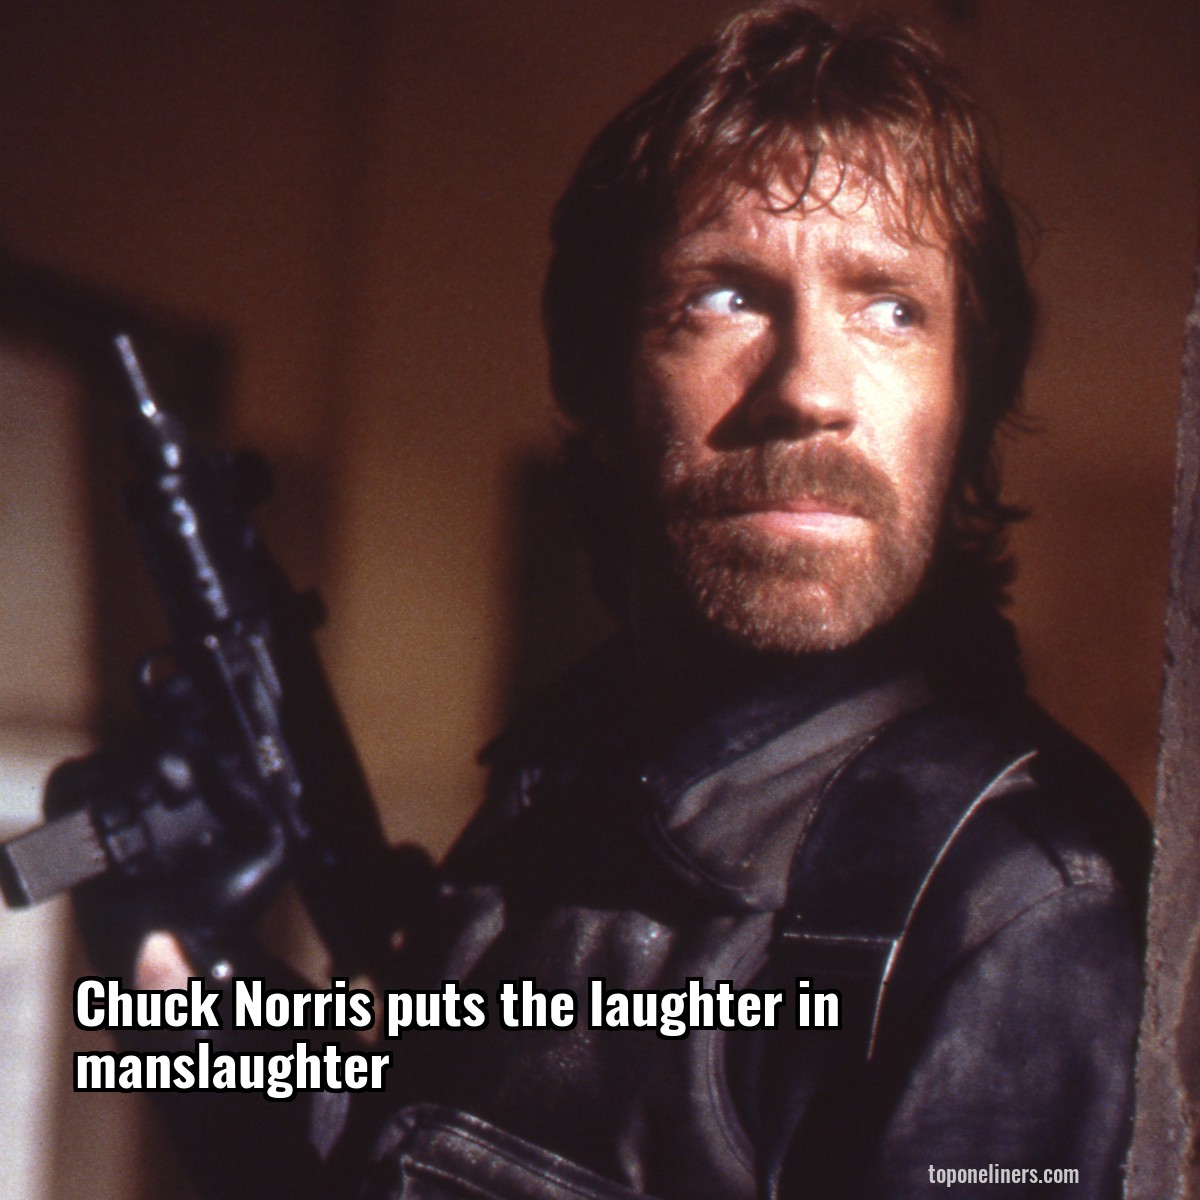 Chuck Norris puts the laughter in manslaughter